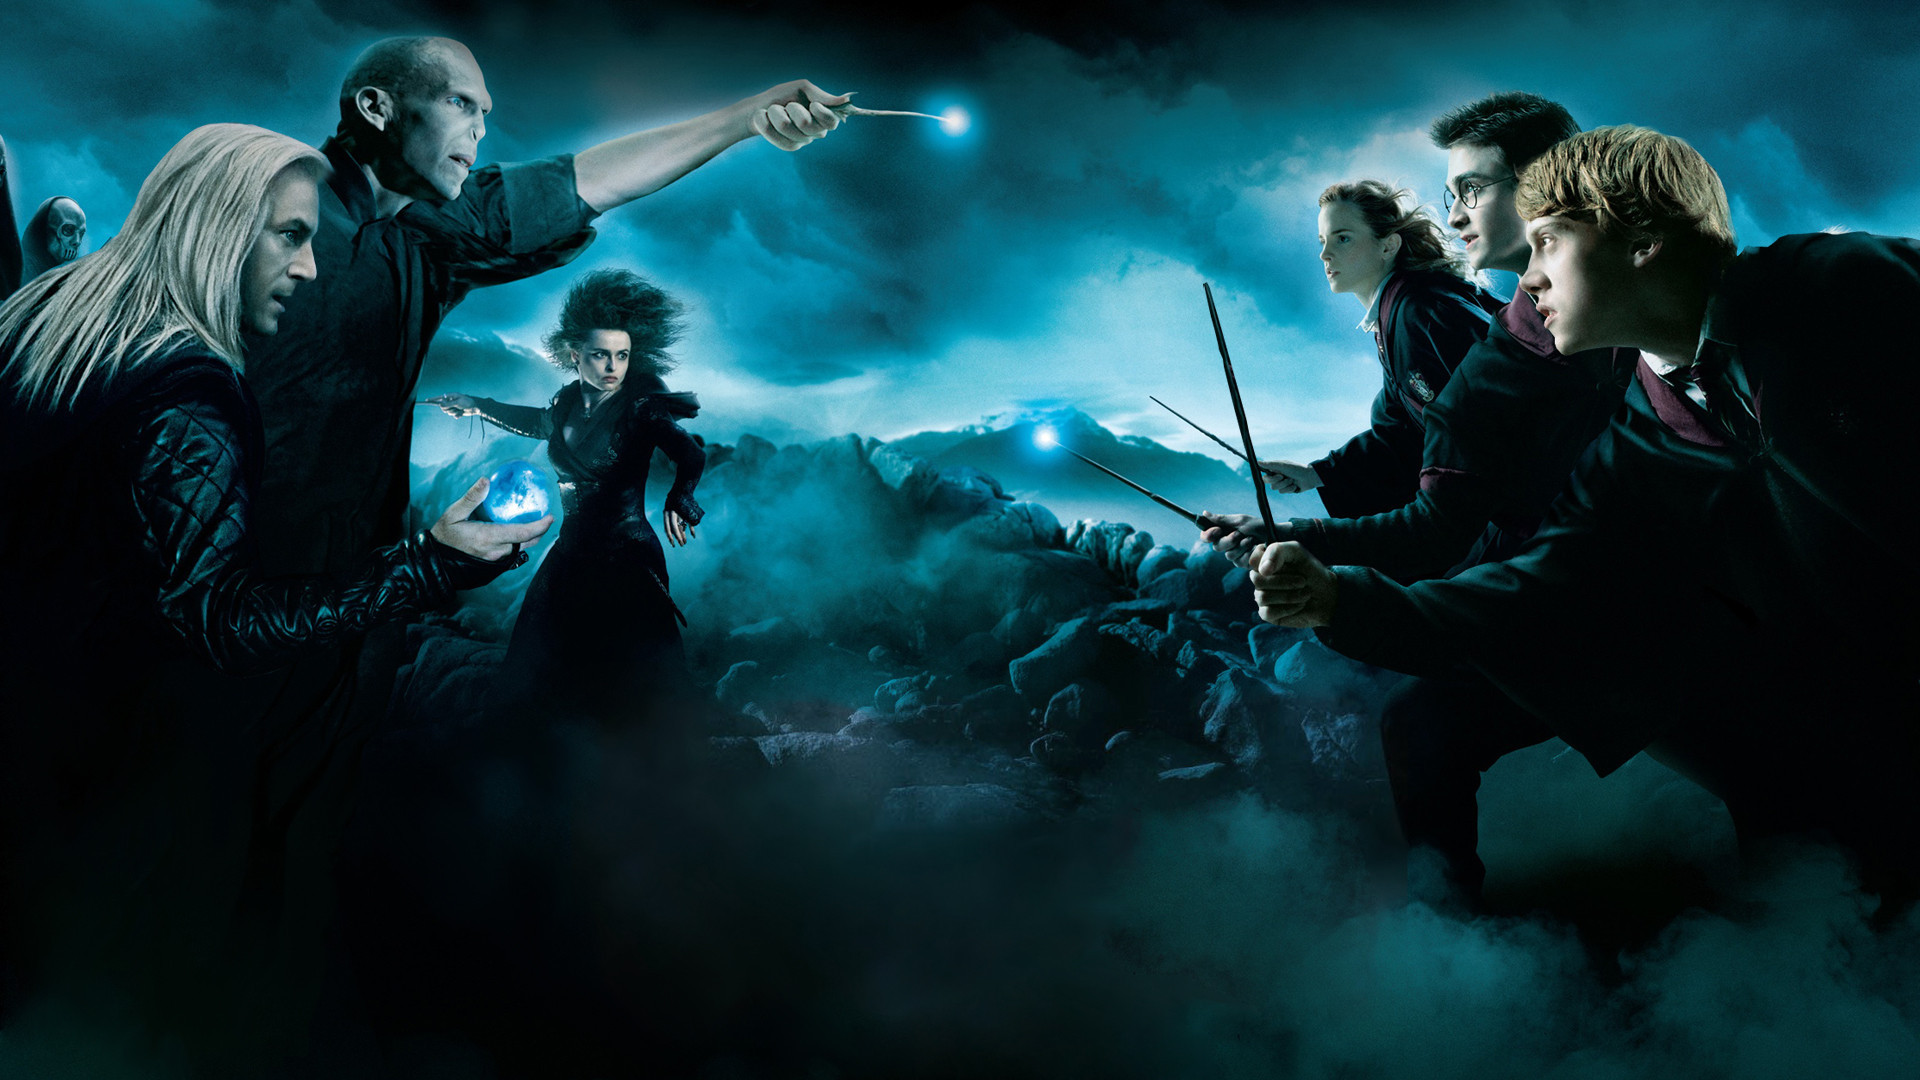 Movie Harry Potter And The Order Of The Phoenix 1920x1080